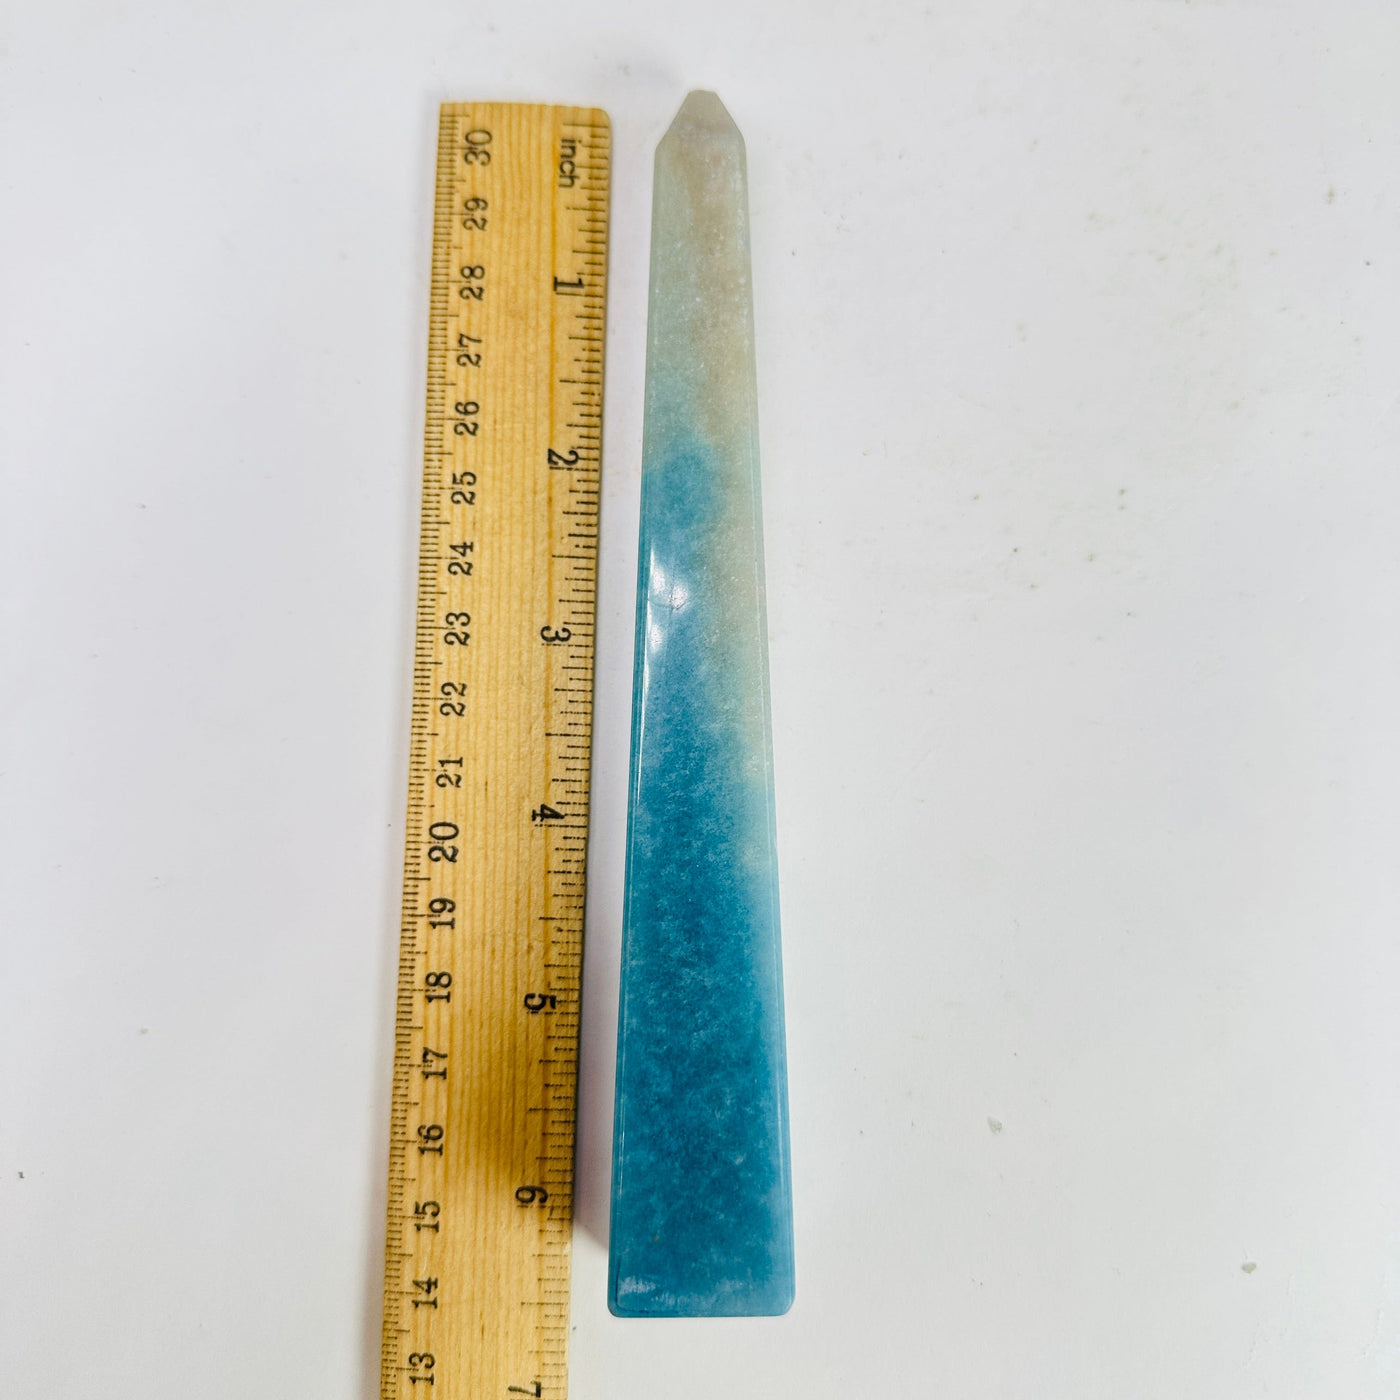 trolleite point next to a ruler for size reference